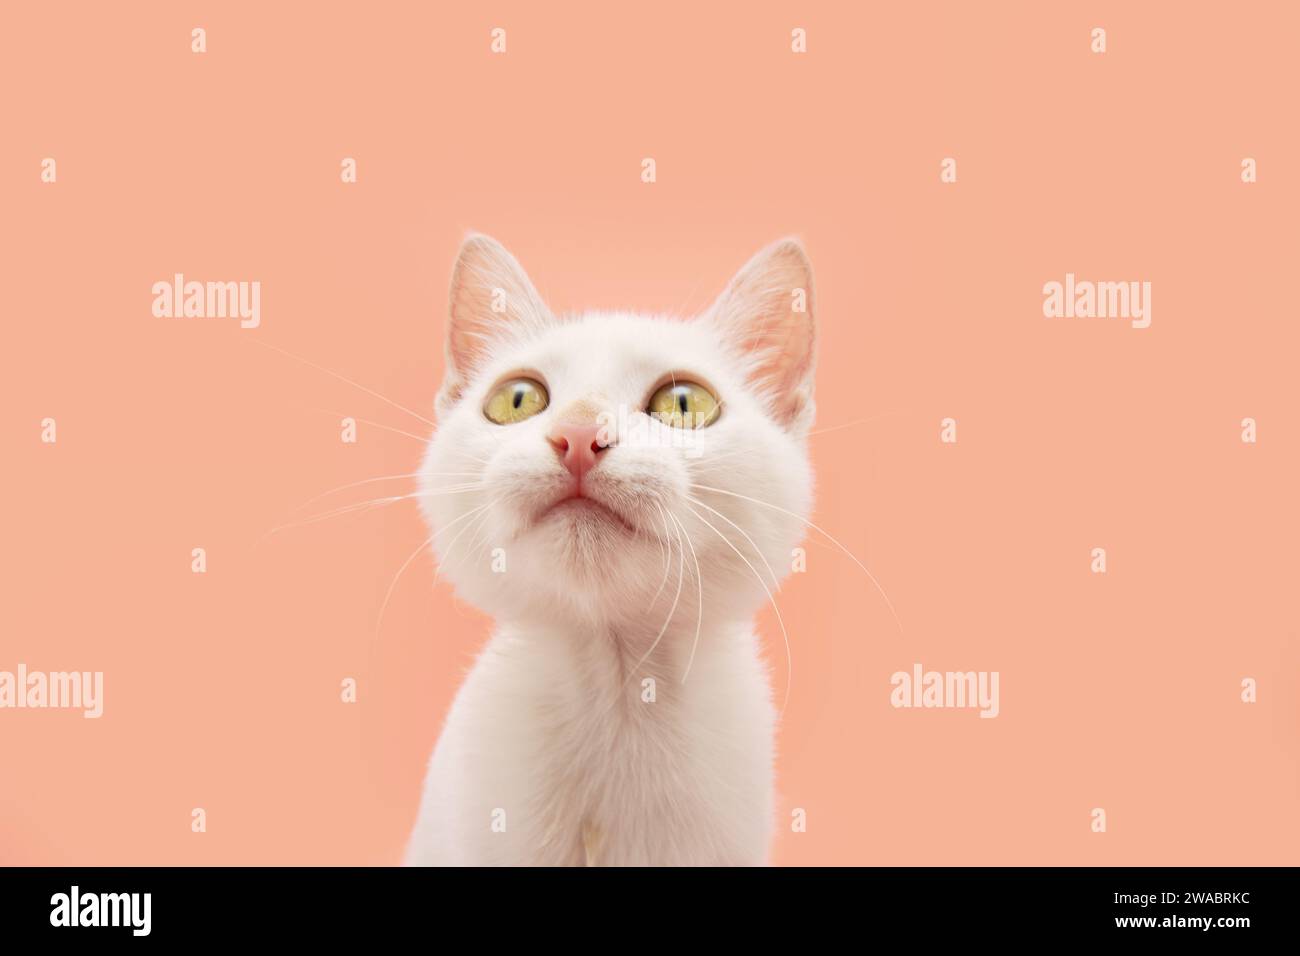 Portrait cute baby cat kitten looking up. Isolated on peach pink pastel background Stock Photo